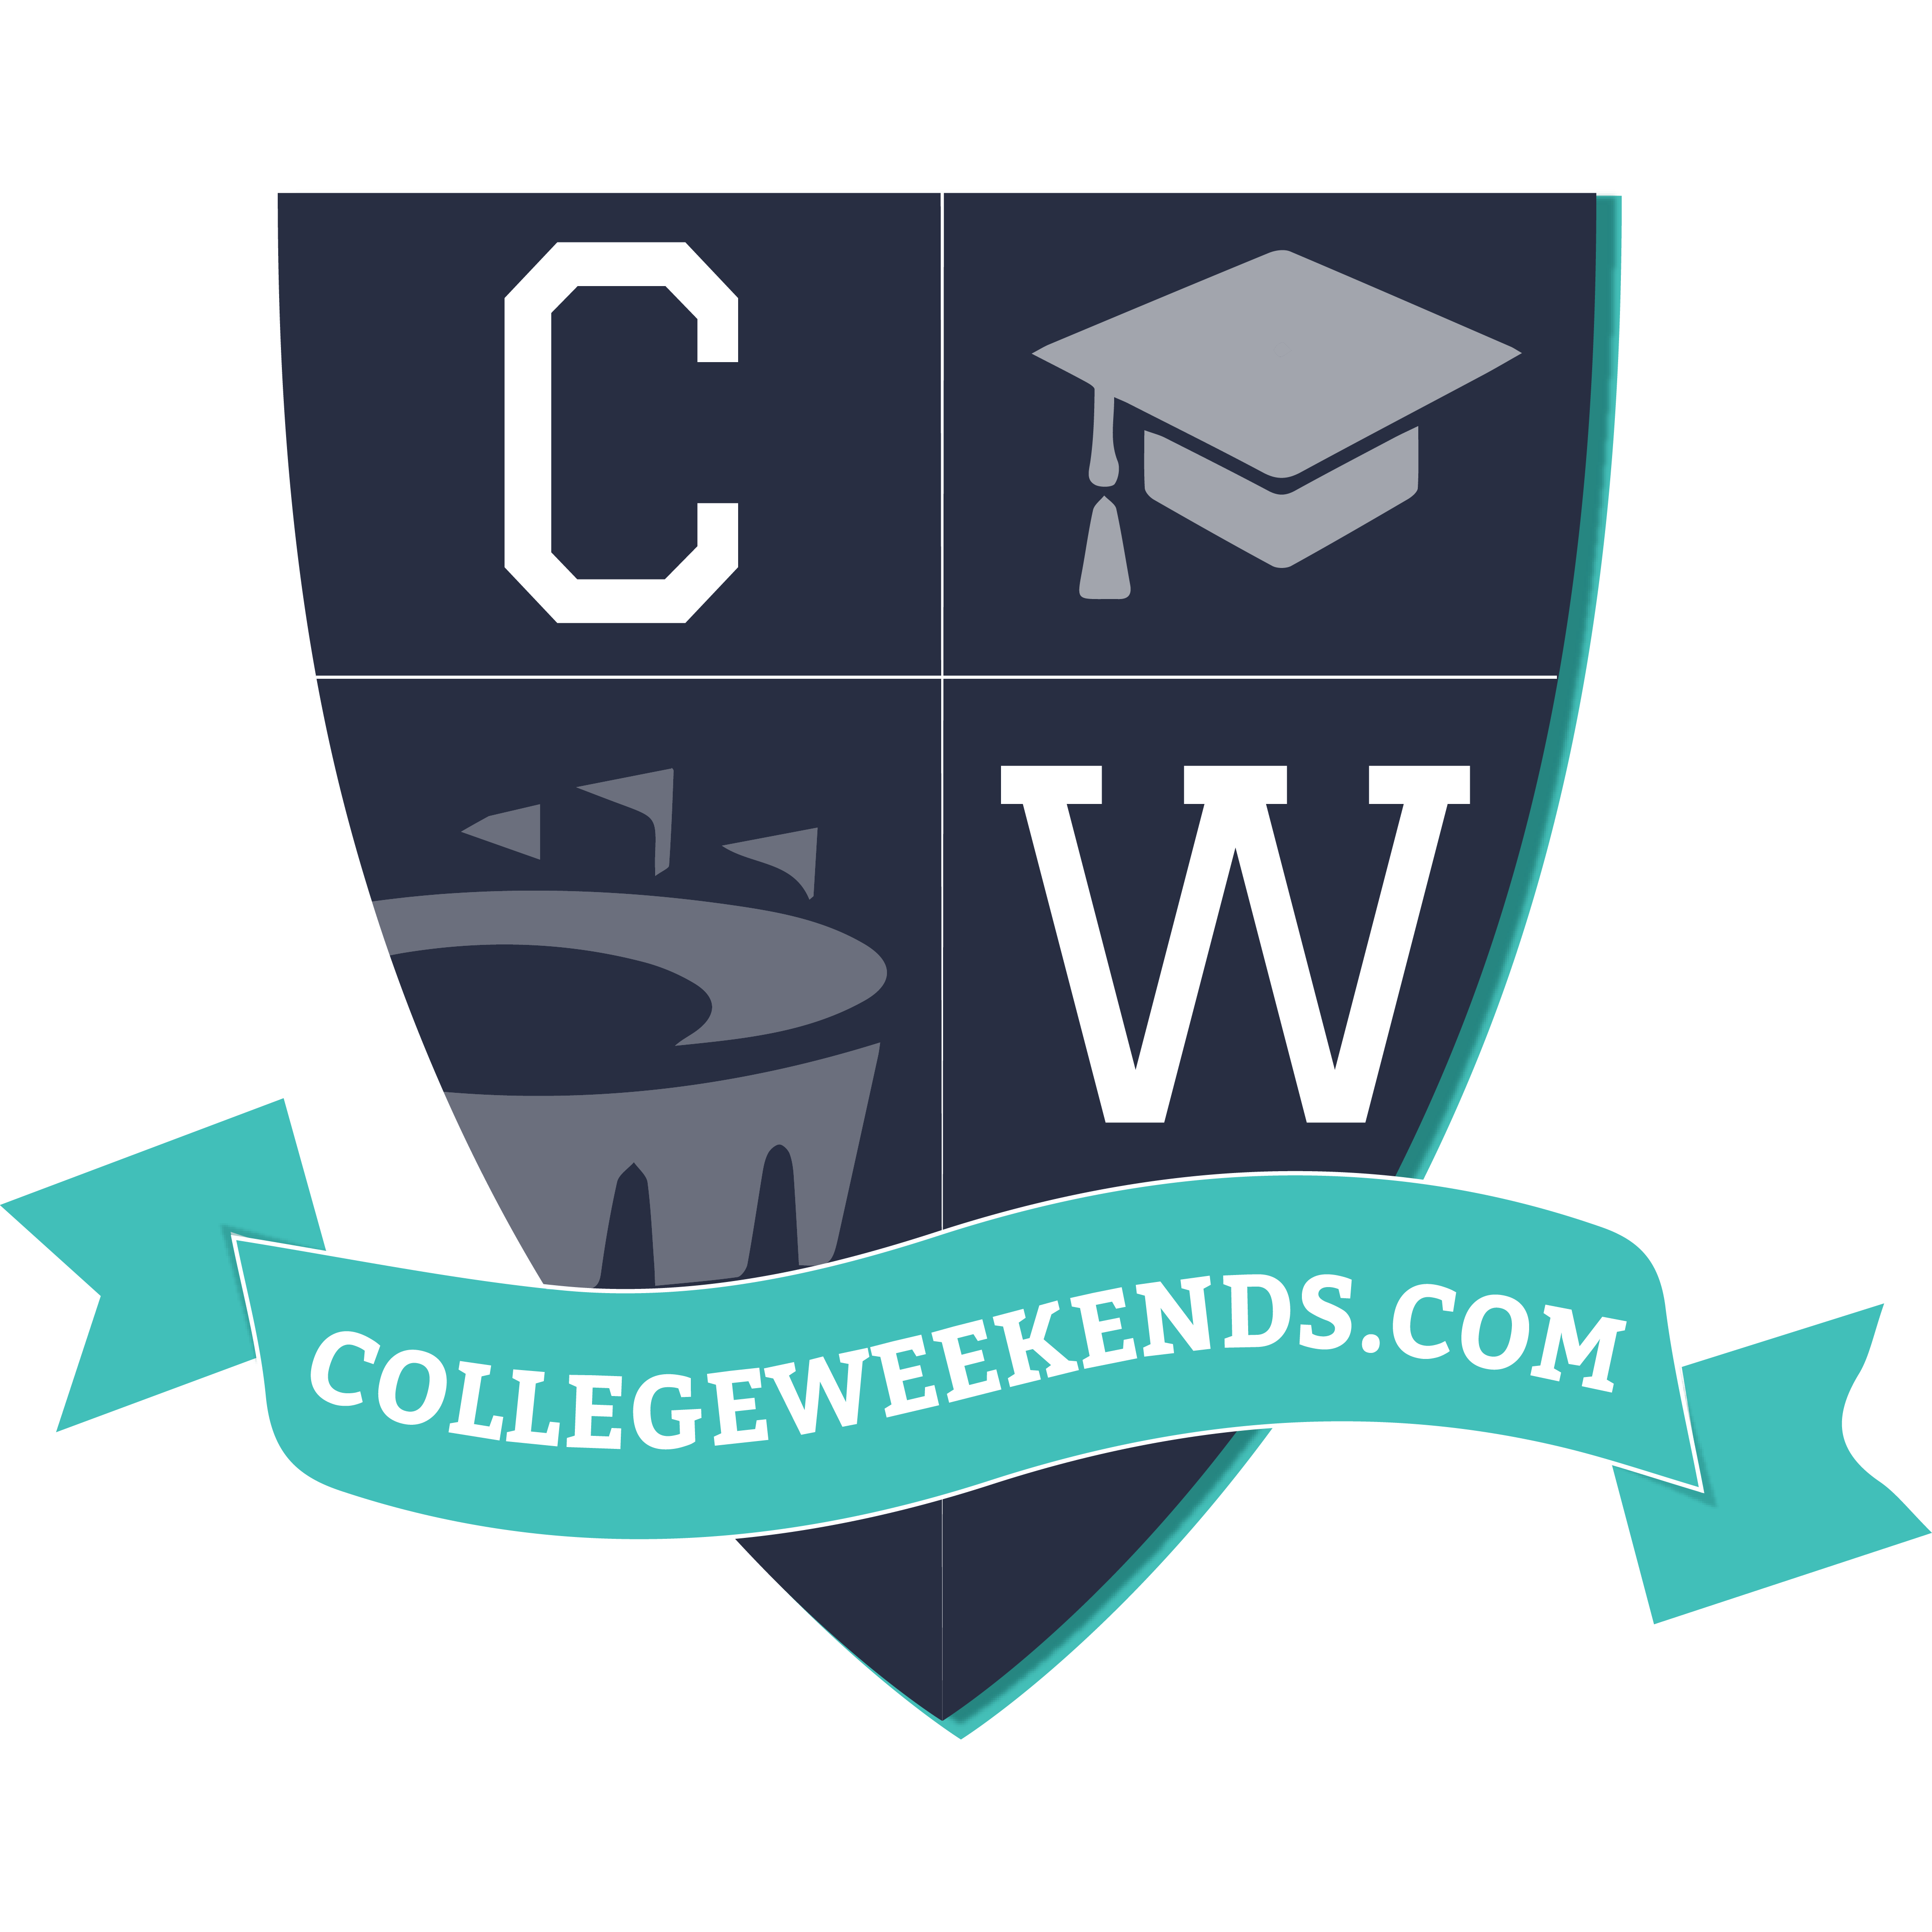 CollegeWeekends: Developers of Platform For Matching Lodging Rentals With College Visitors, Launches Equity Crowdfunding Campaign 